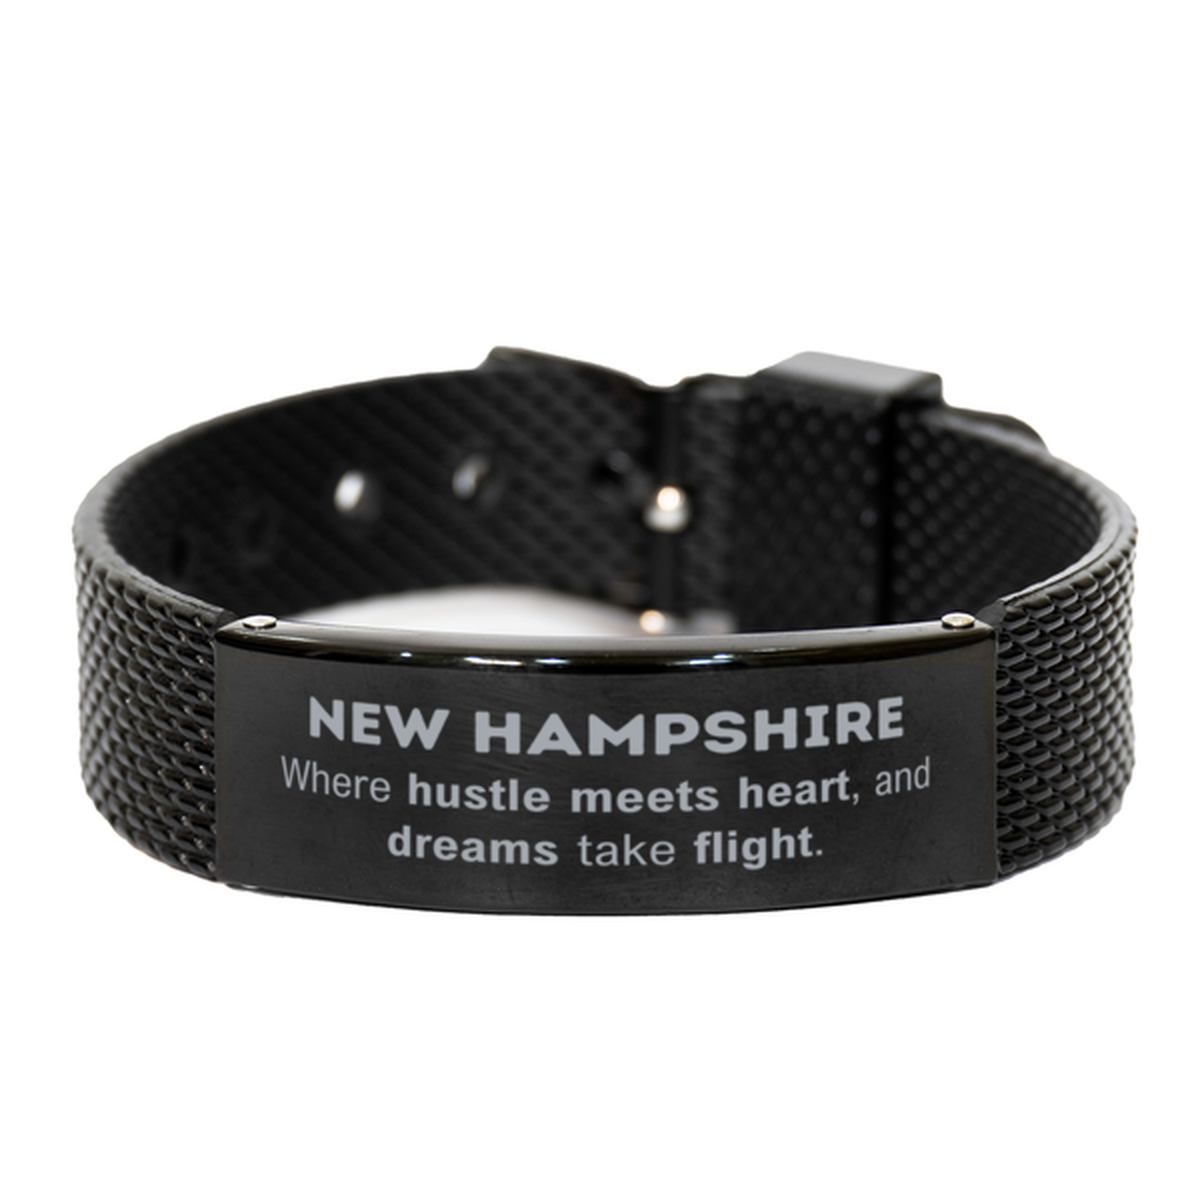 New Hampshire: Where hustle meets heart, and dreams take flight, New Hampshire Gifts, Proud New Hampshire Christmas Birthday New Hampshire Black Shark Mesh Bracelet, New Hampshire State People, Men, Women, Friends